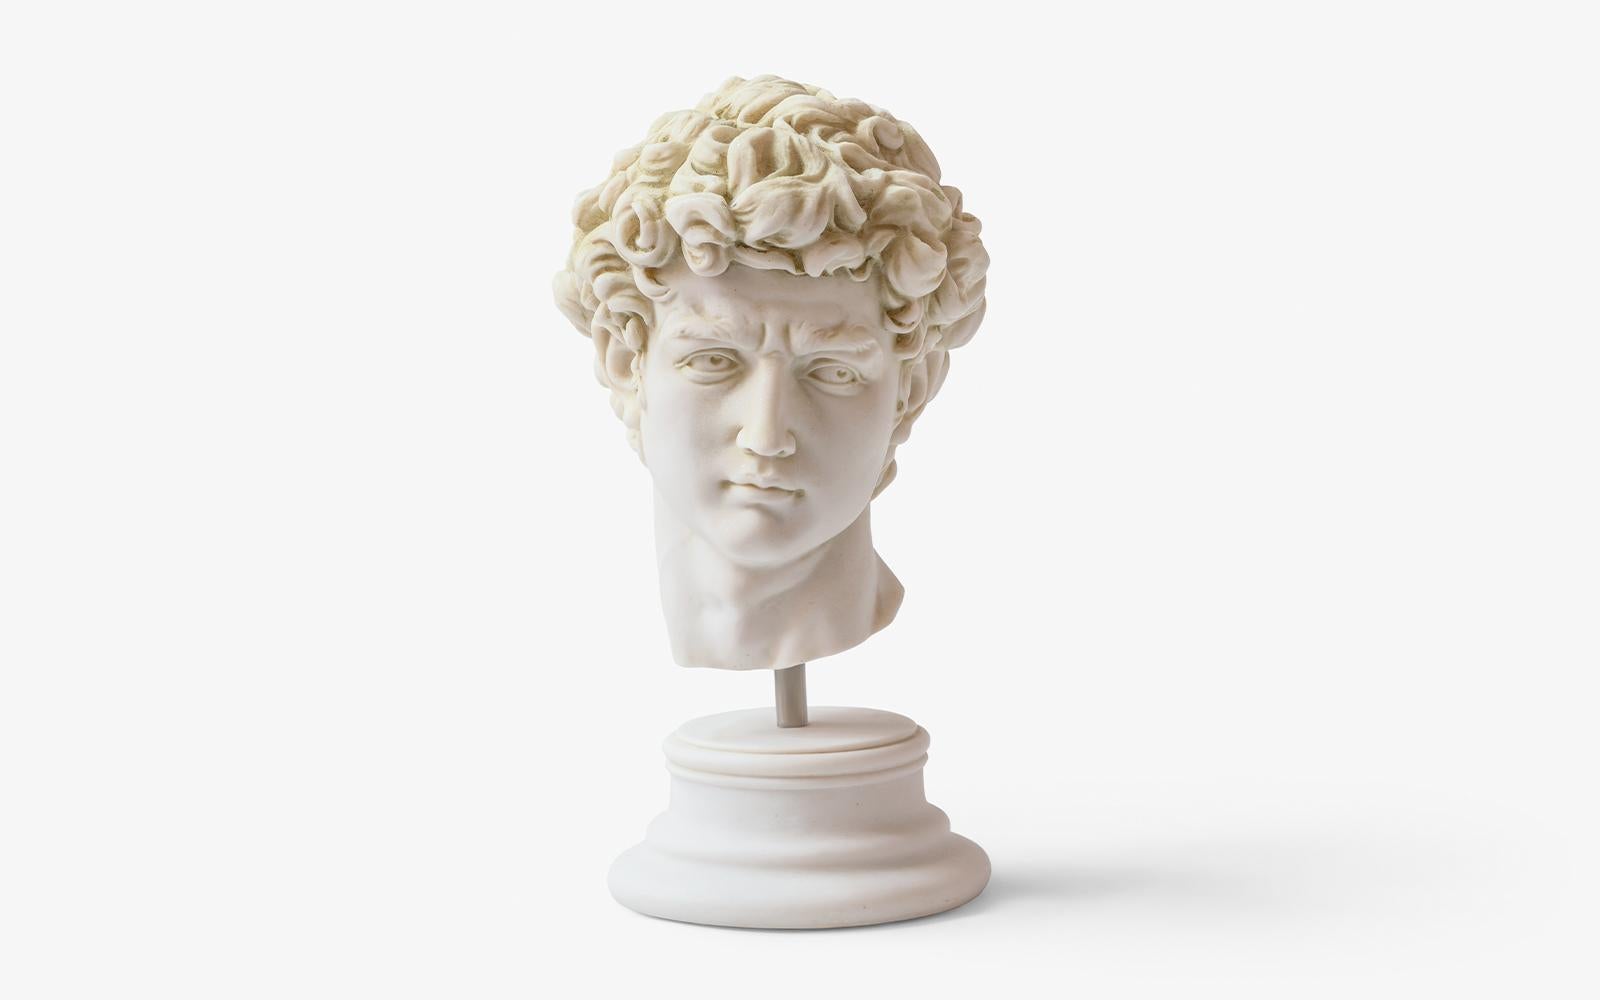 The David bust by Michelangelo is a high-quality replica of the famous David sculpture created by the Italian artist during the Renaissance period. This item is made from pressed marble powder and has a height of 11.8 inches (30 cm) and a weight of